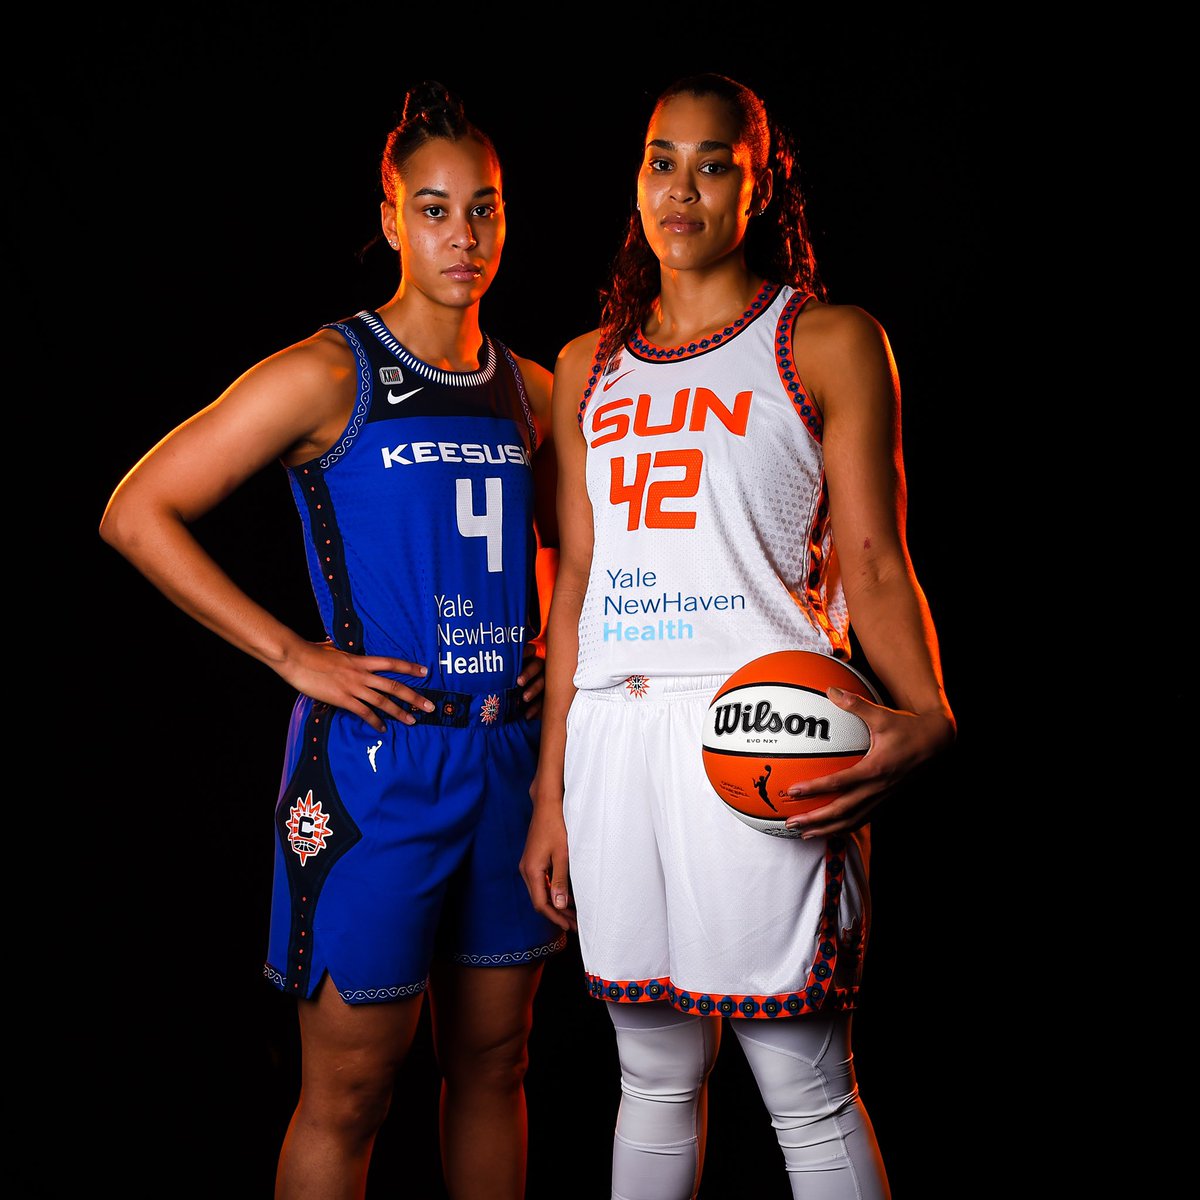 The sisterhood is real 🧡 Brionna and Stephanie Jones will take the floor together tonight as sisters in the WNBA for the first time. #BornForThis